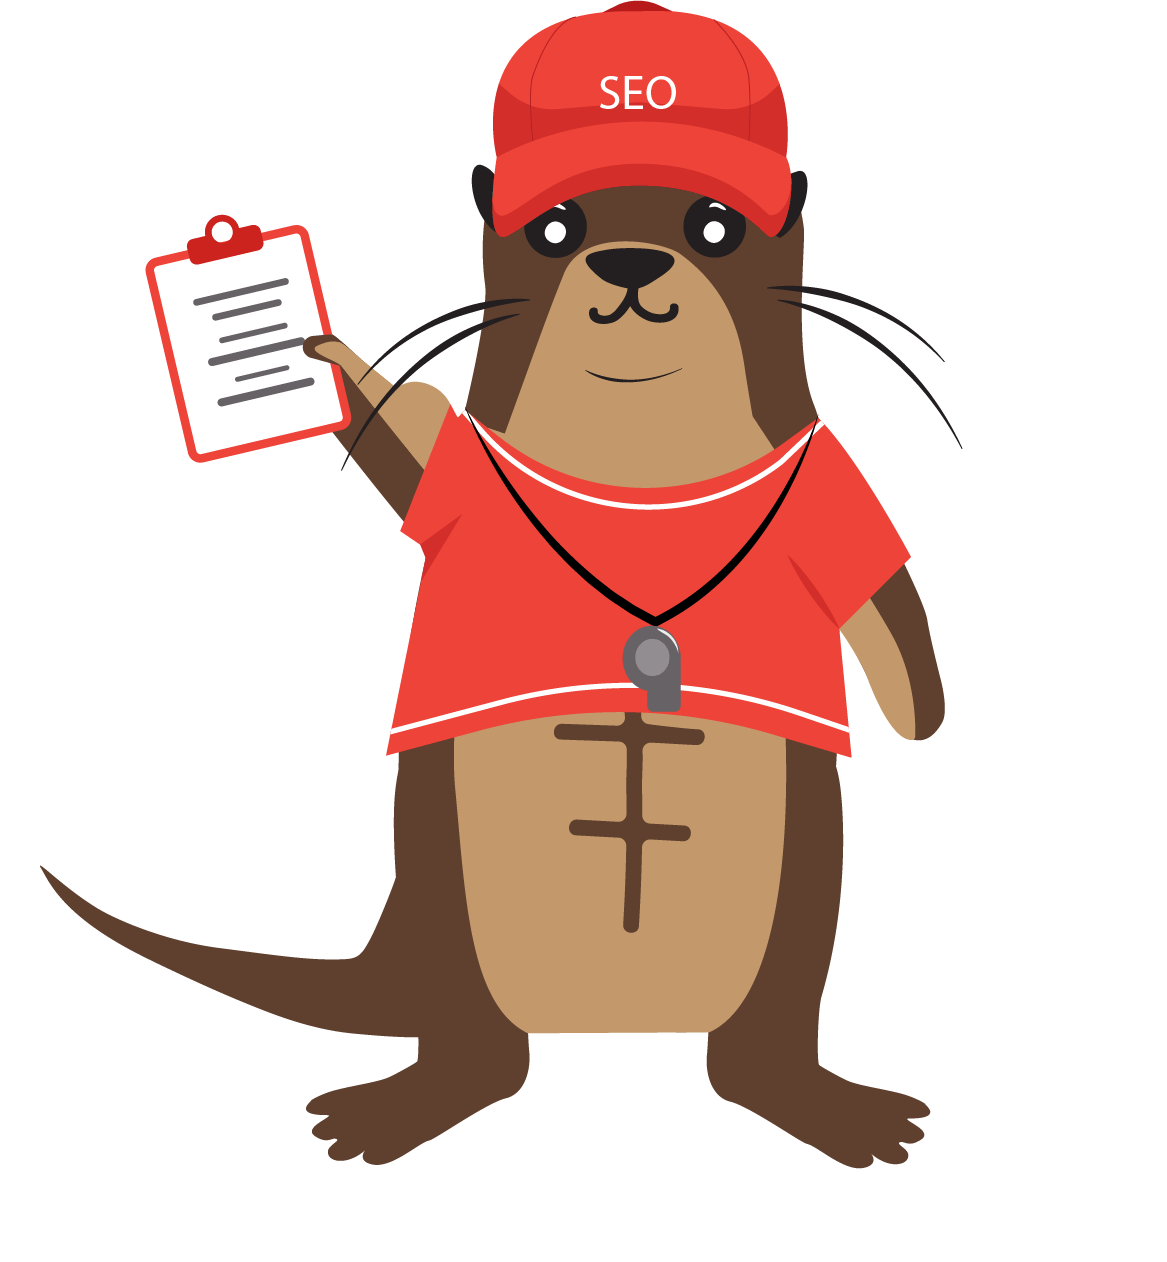 seo coach online otter wearing red hat and red shirt